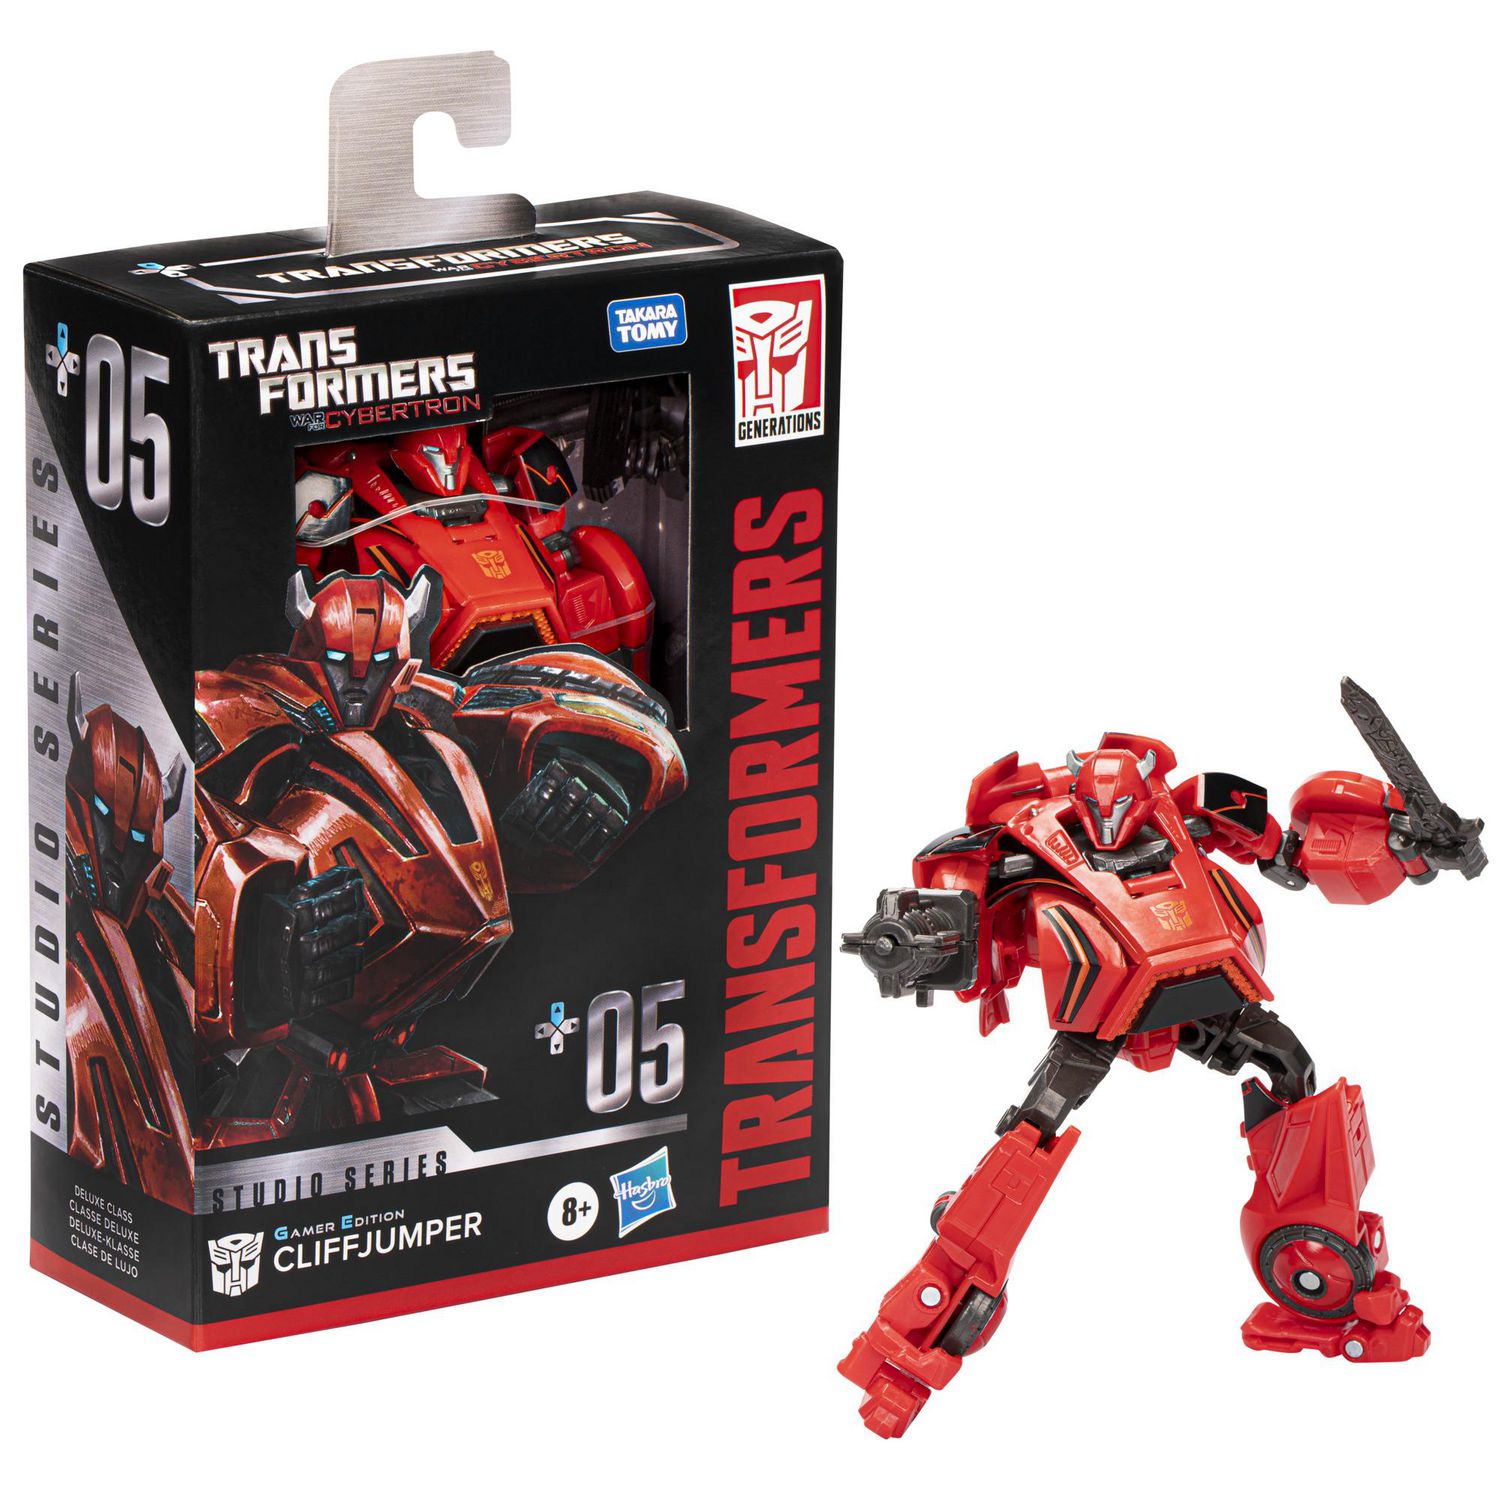 Transformers Toys Studio Series Deluxe Transformers: War for Cybertron 05  Gamer Edition Cliffjumper Toy, 4.5-inch, Action Figure For Boys And Girls  